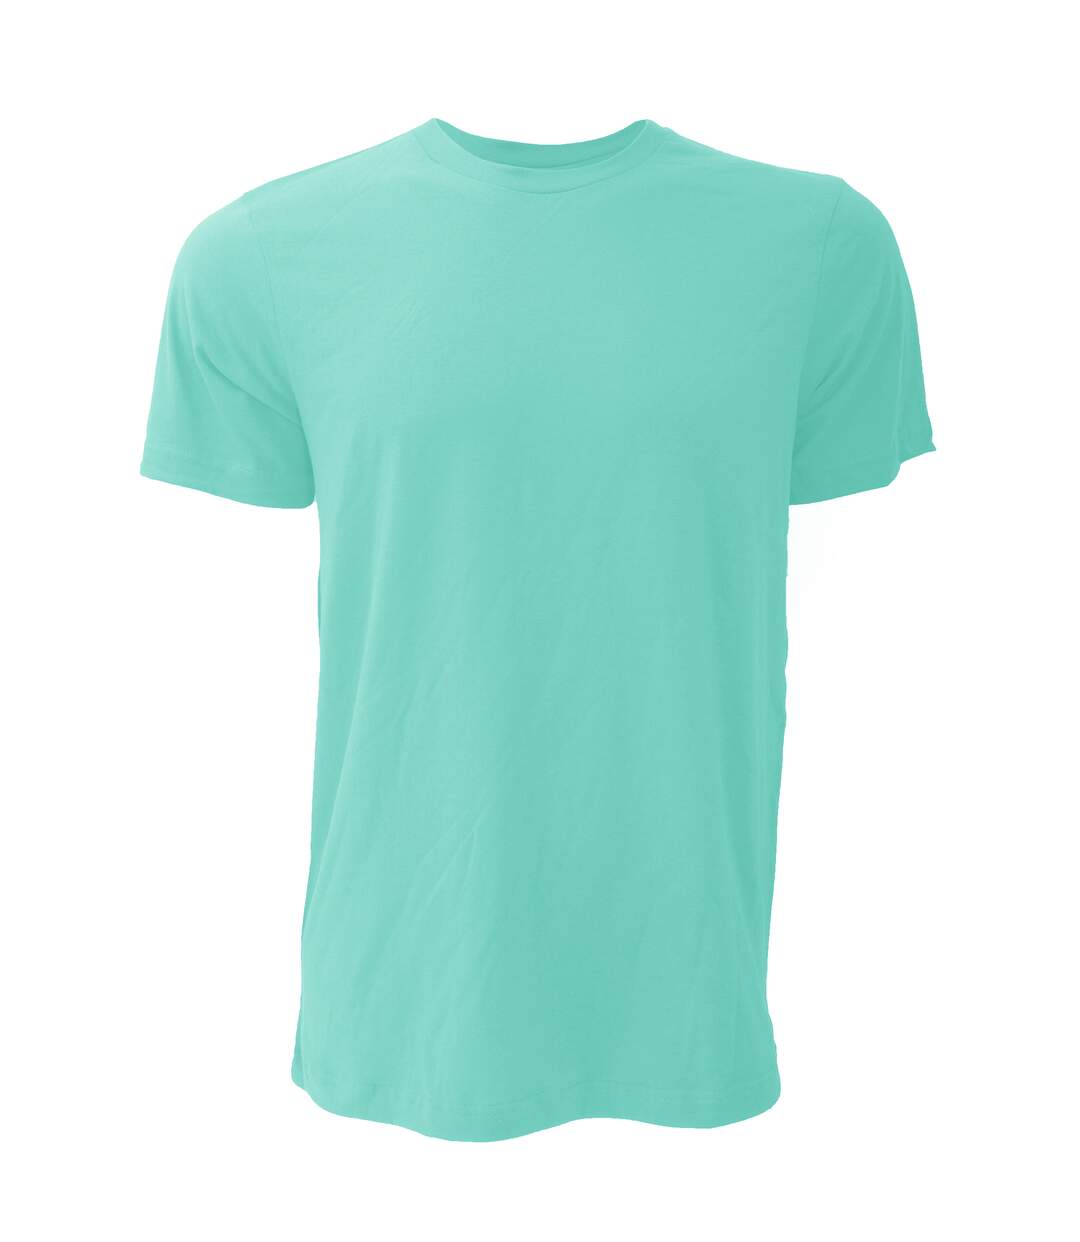 Canvas - T-shirt JERSEY - Hommes (Turquoise) - UTBC163